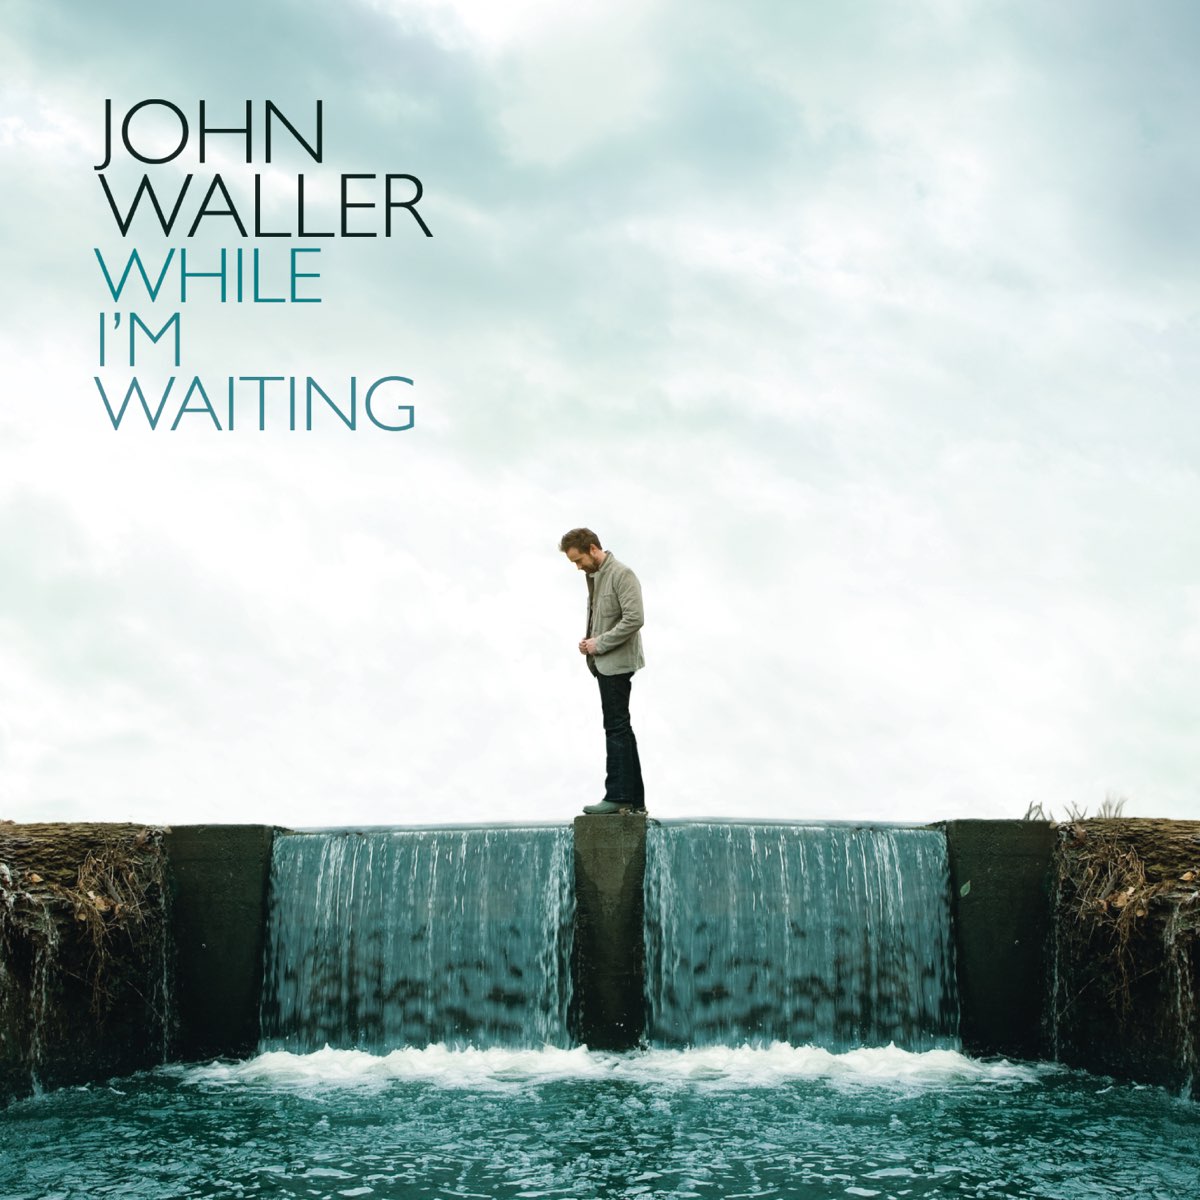 John is waiting. Christian Waller. Джон Уоллер. Магнит i'm waiting. Валлер текст.